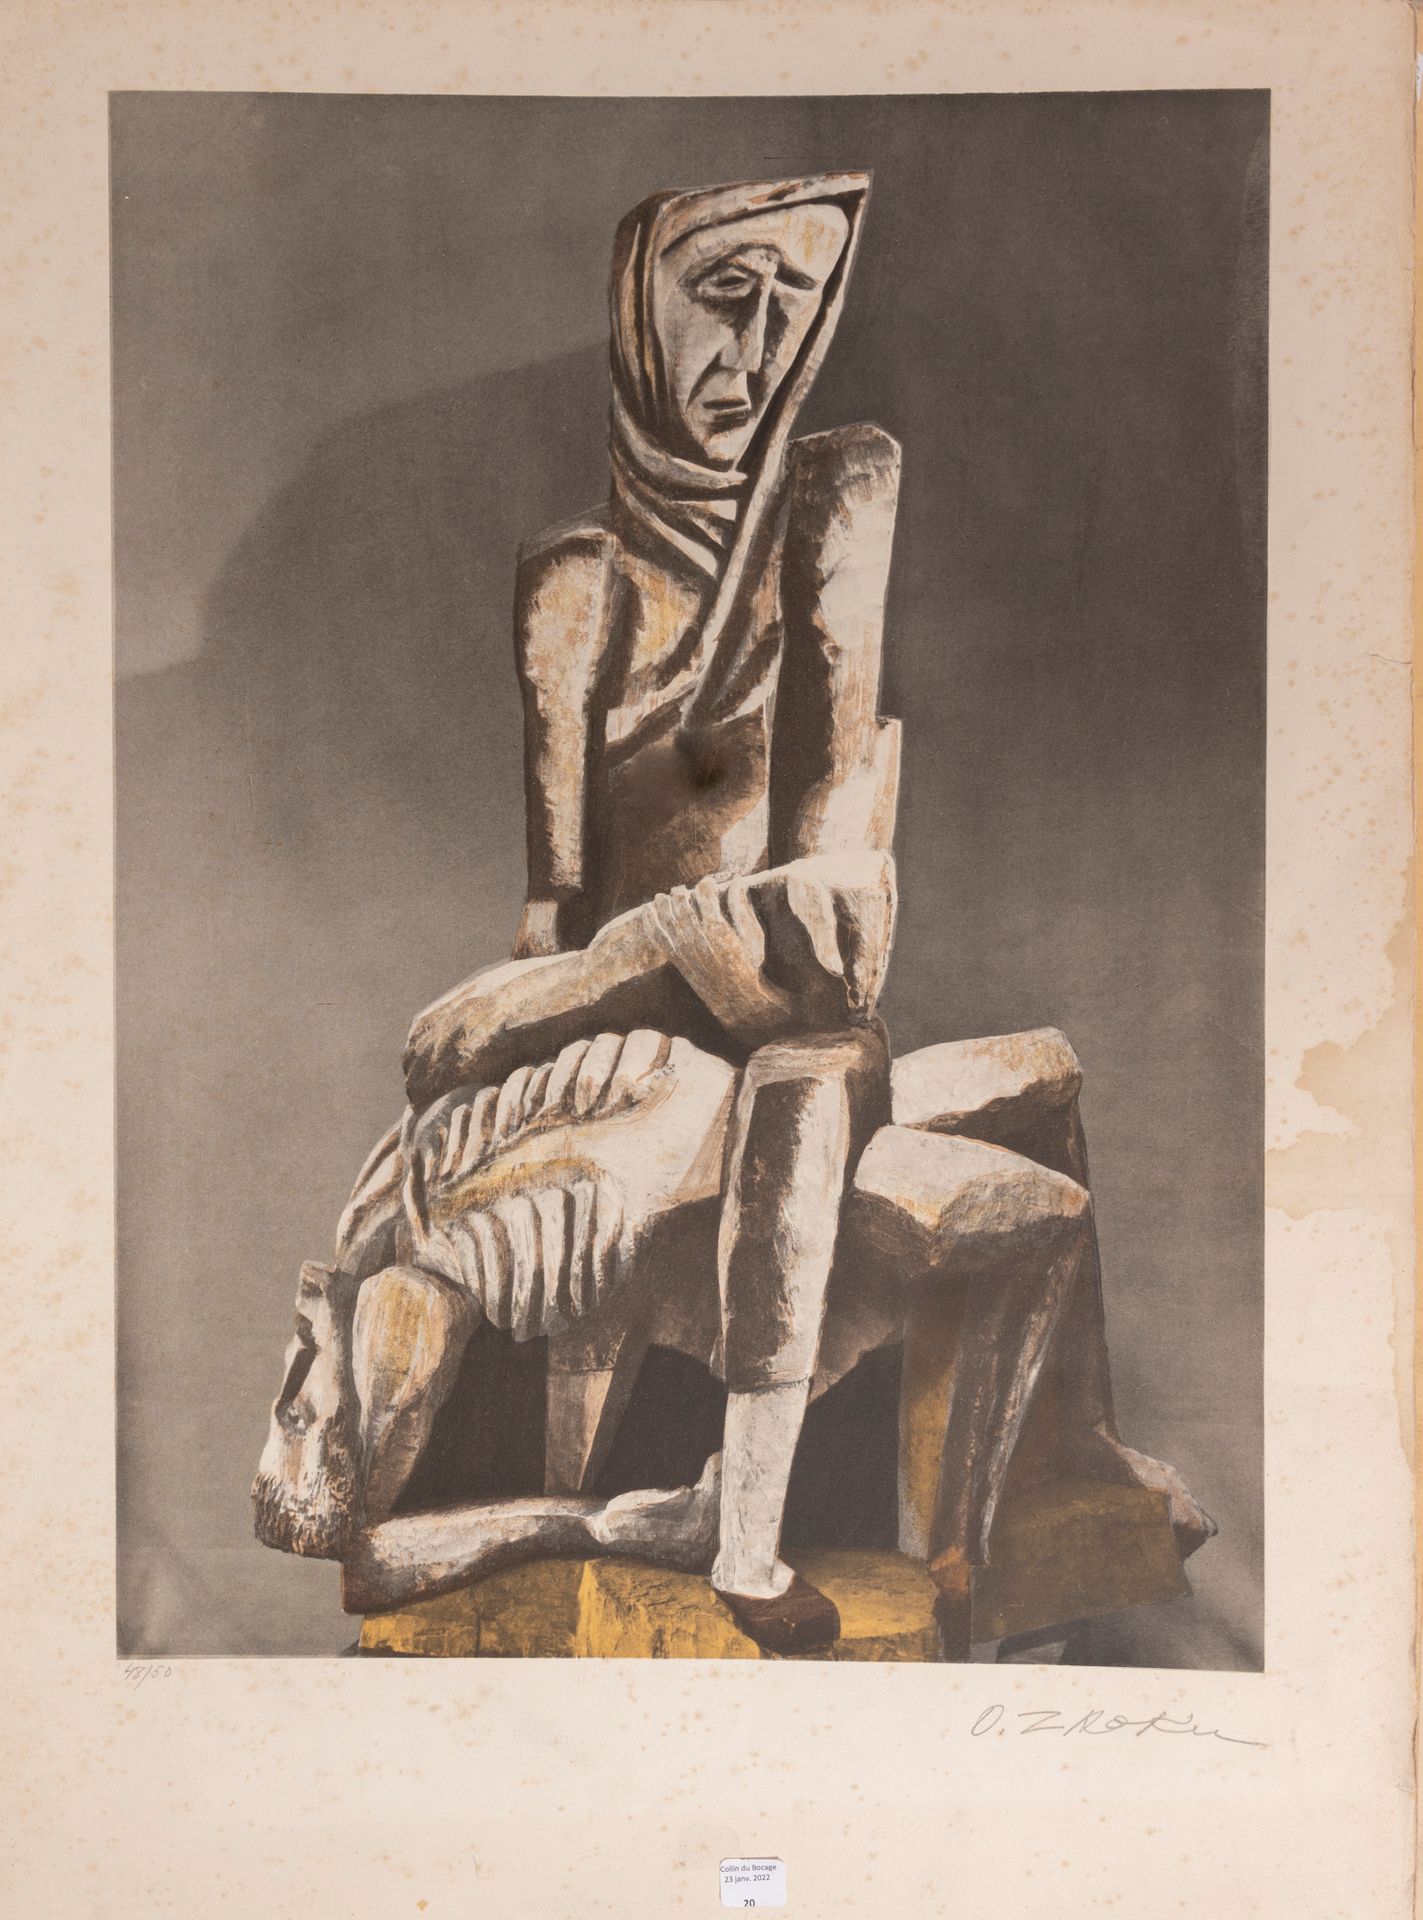 Null O ZADKINE " pieta " proof signed in pencil lower right. Justified on 50.